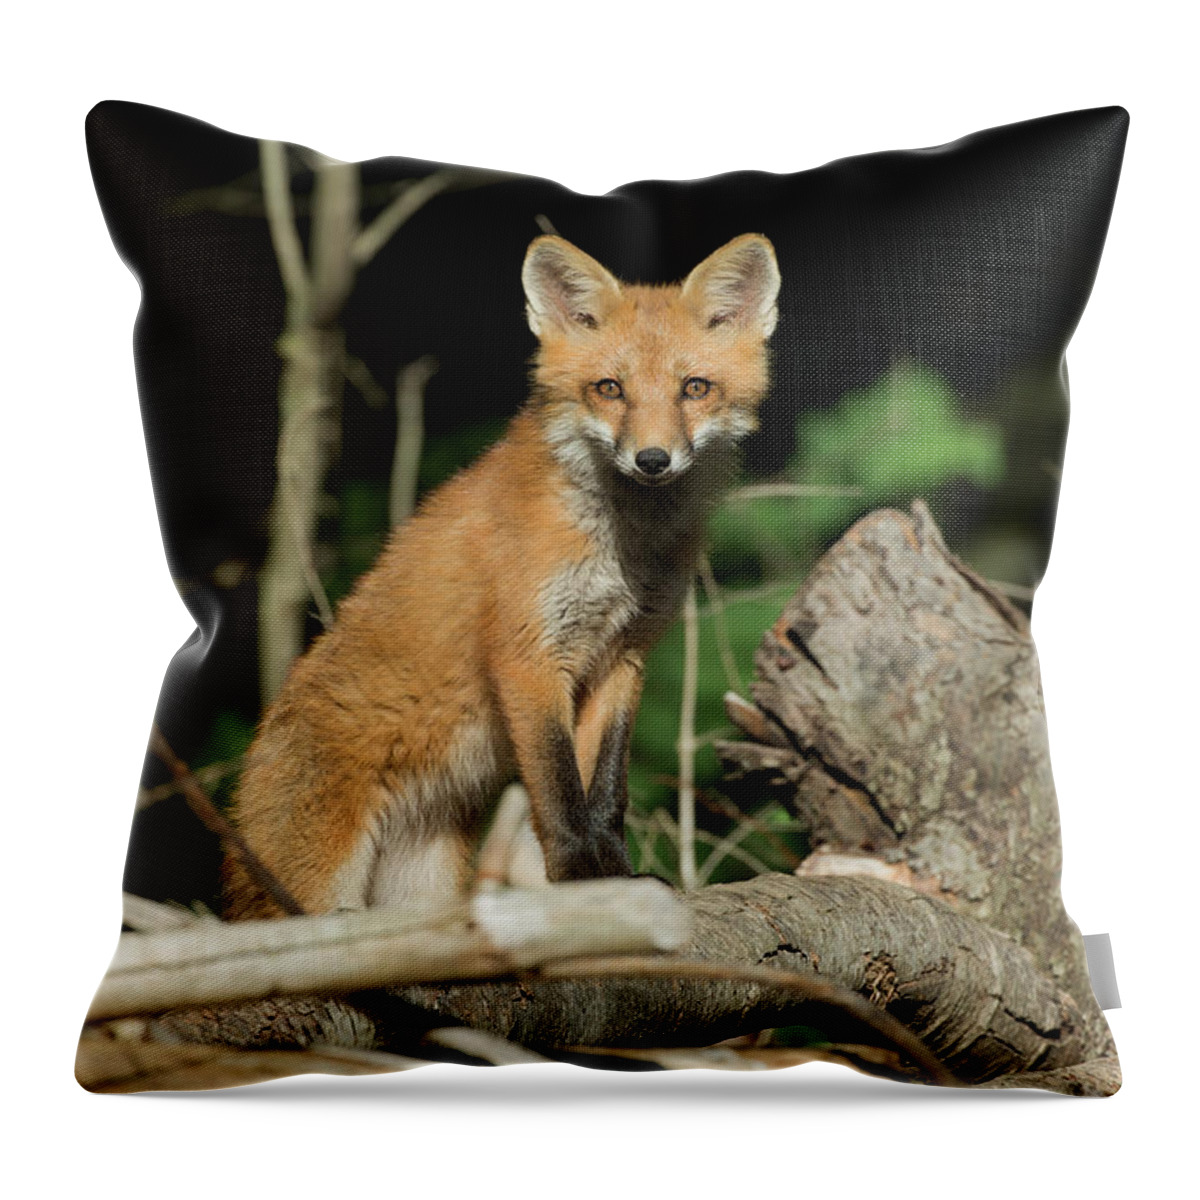 Fox Throw Pillow featuring the photograph Curious Fox by Everet Regal